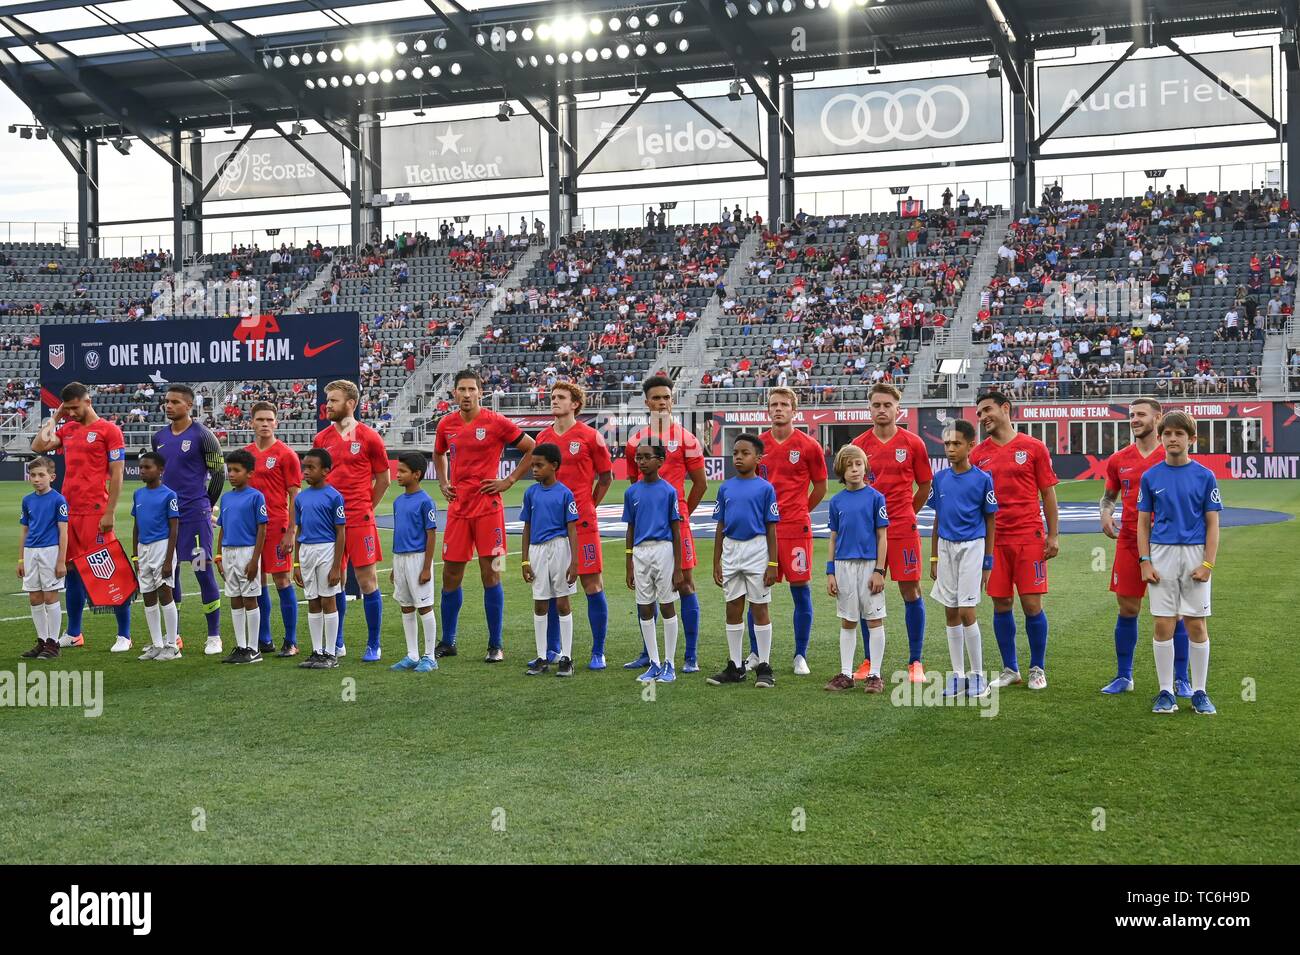 Washington, DC, USA. 5th June, 2019. Team USA is introduced to the crowd at Audi Field in Washington, DC. Credit: Amy Sanderson/ZUMA Wire/Alamy Live News Stock Photo